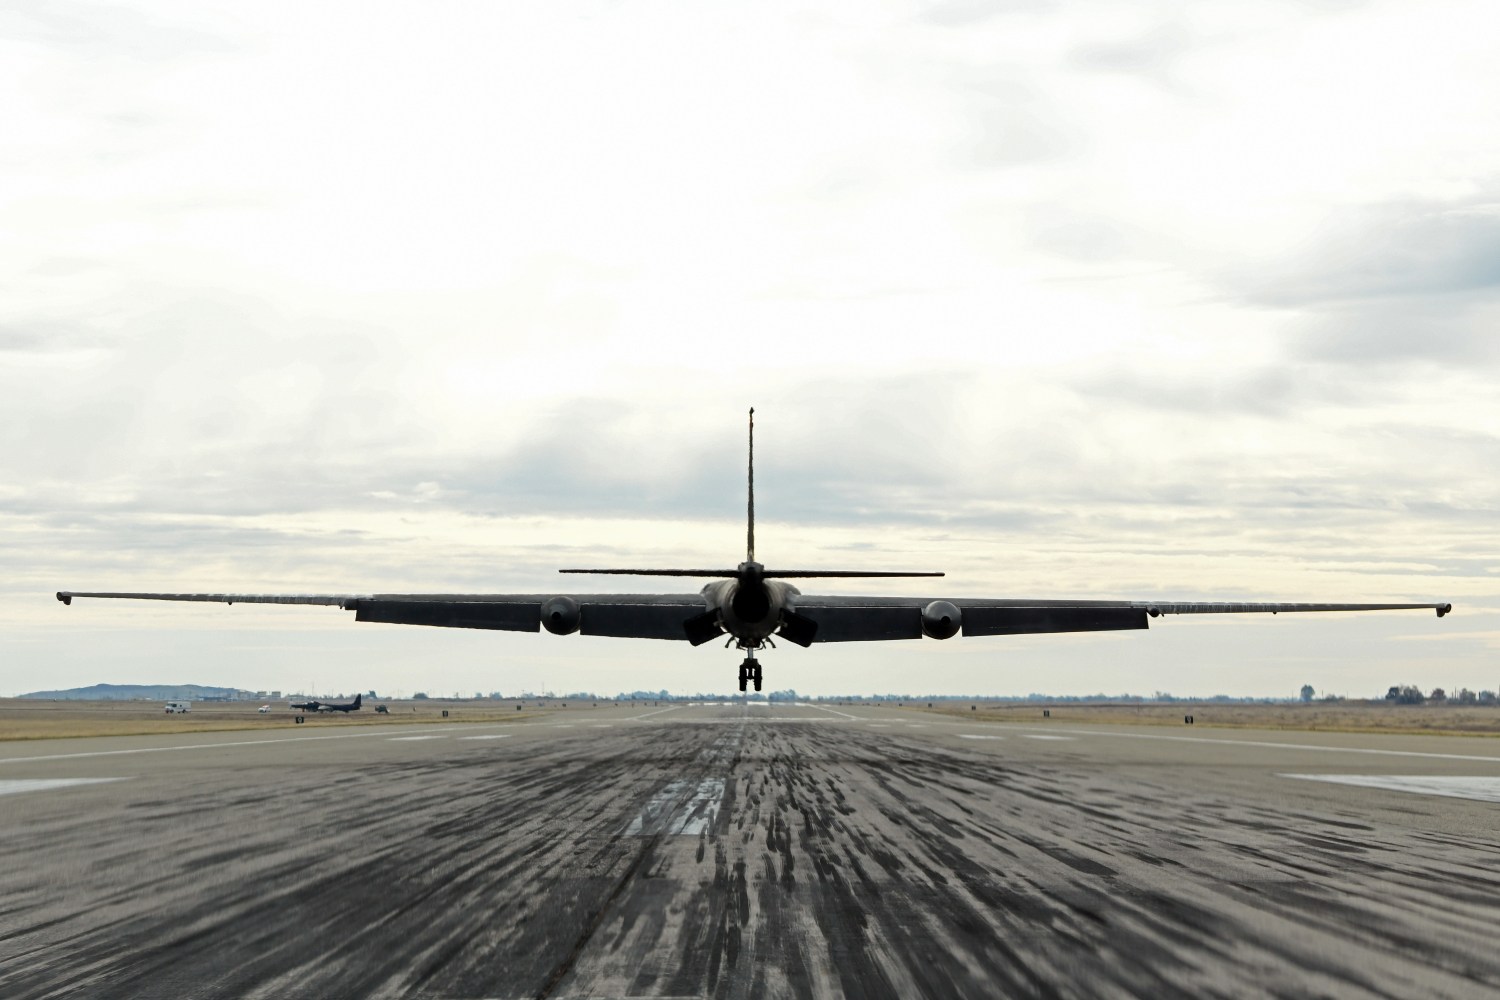 A U-2 spy plane that is being used to test AI applications lands at an air field.